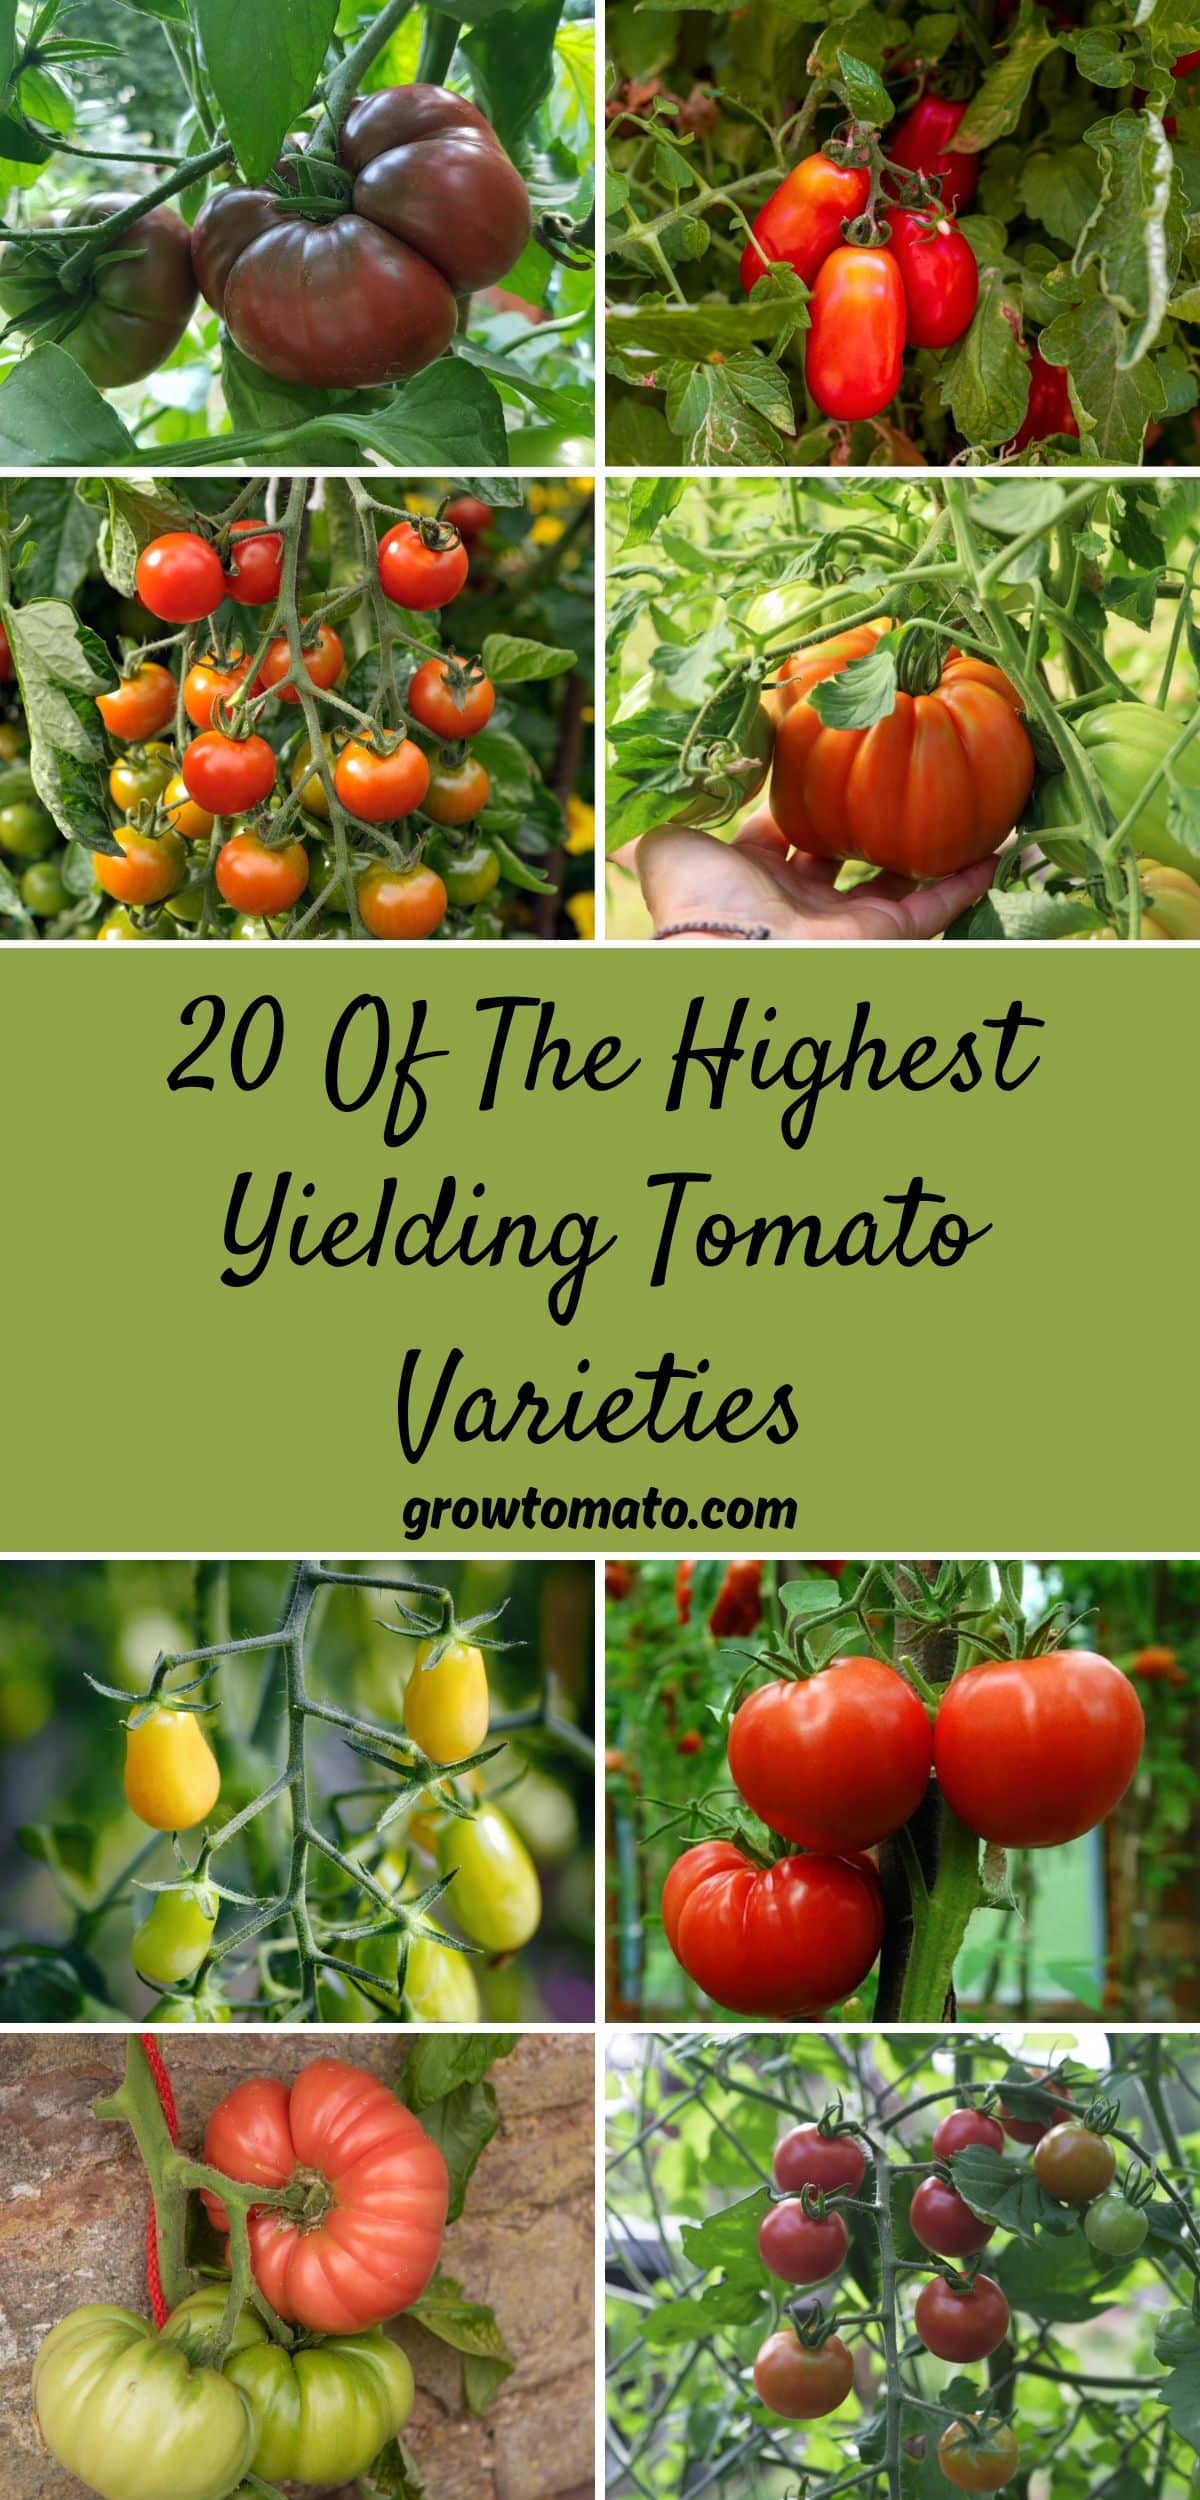 20 Of The Highest Yielding Tomato Varieties collage.